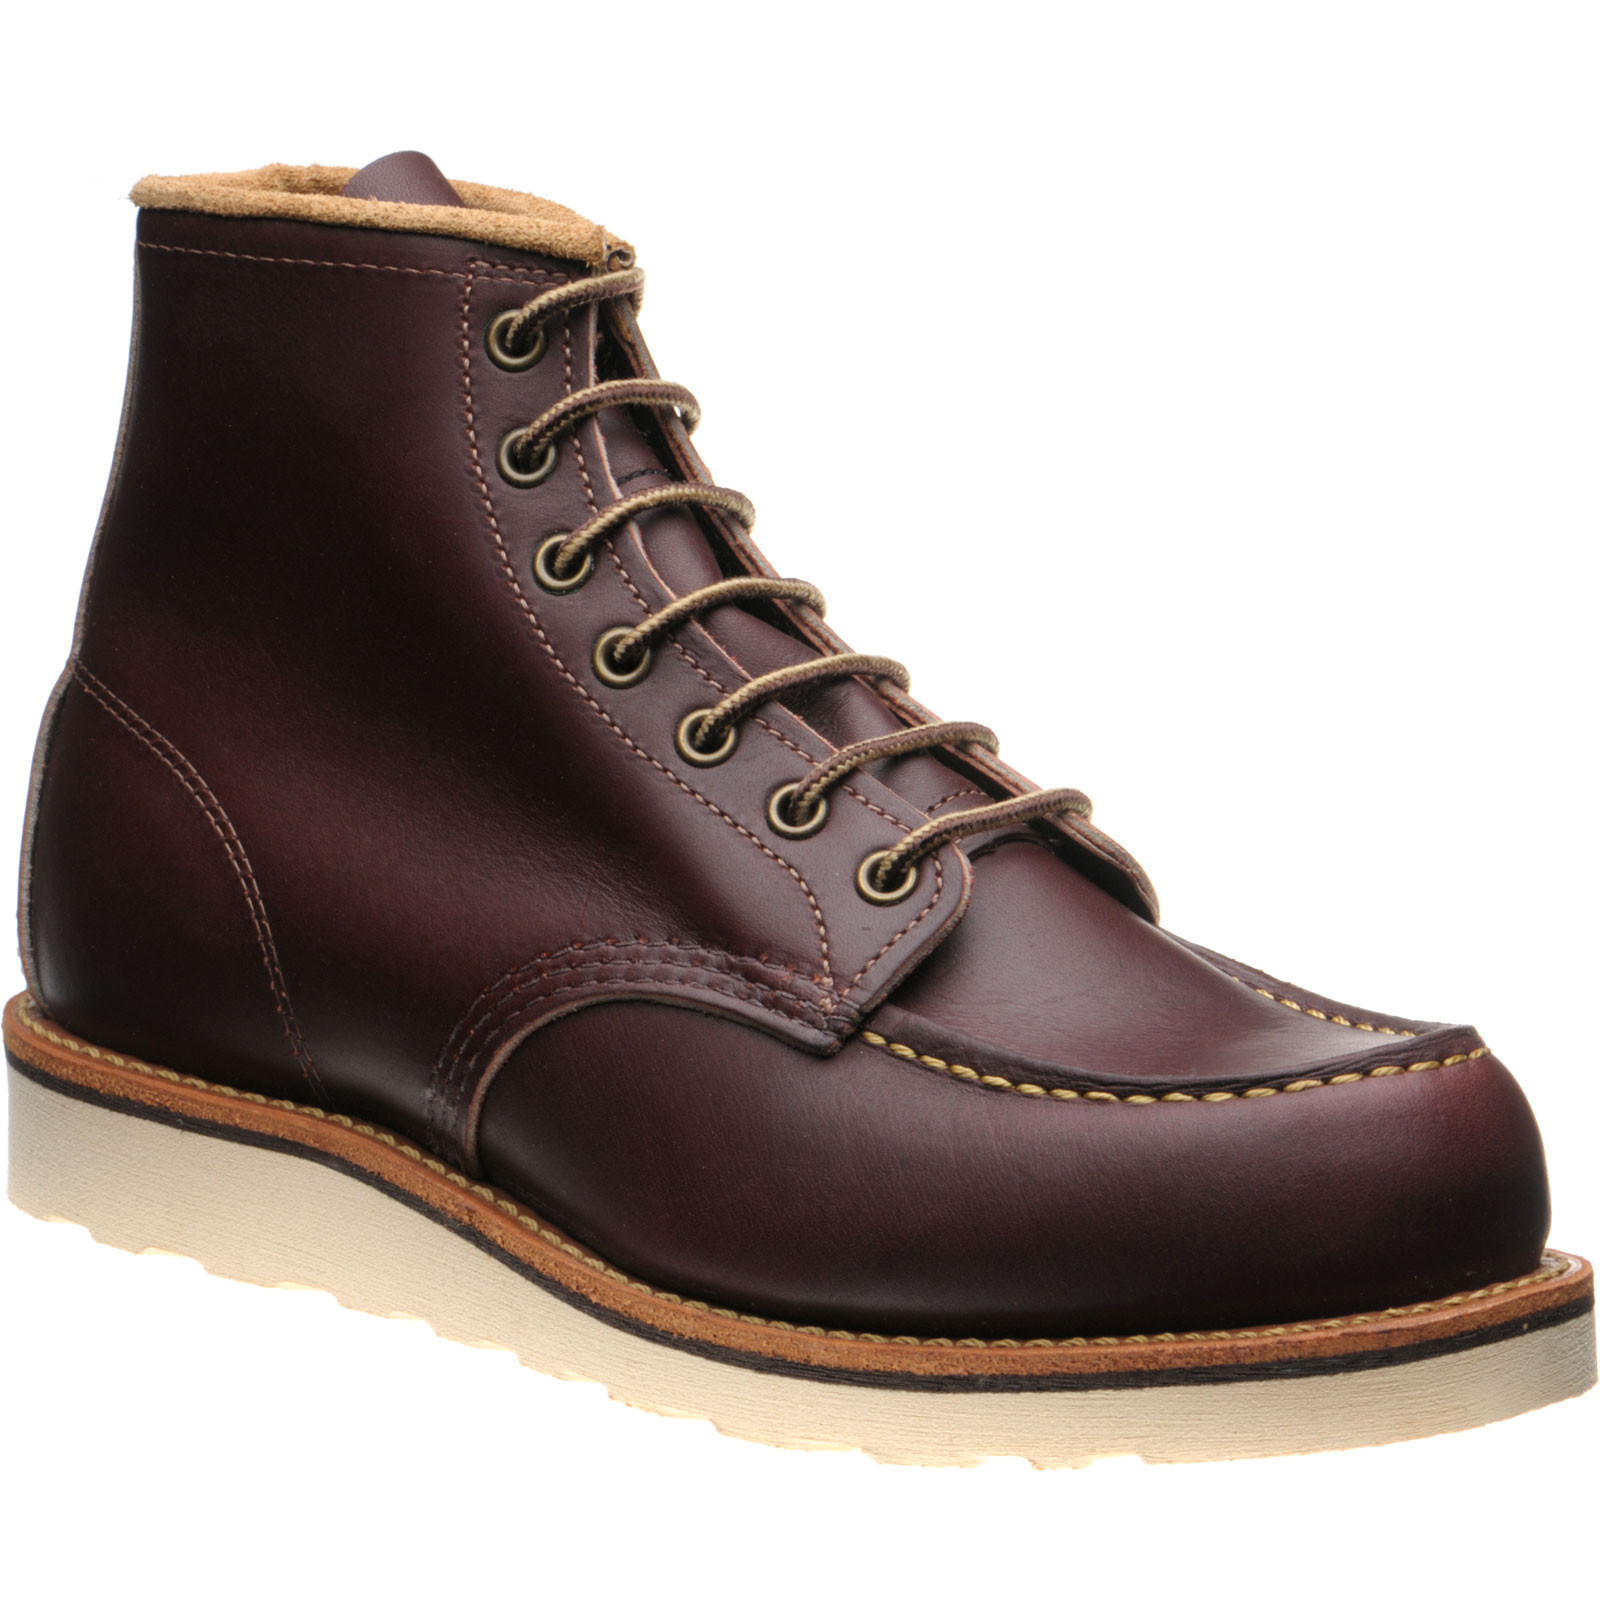 Red Wing shoes | Red Wing Heritage | 6-Inch Classic Moc rubber-soled ...